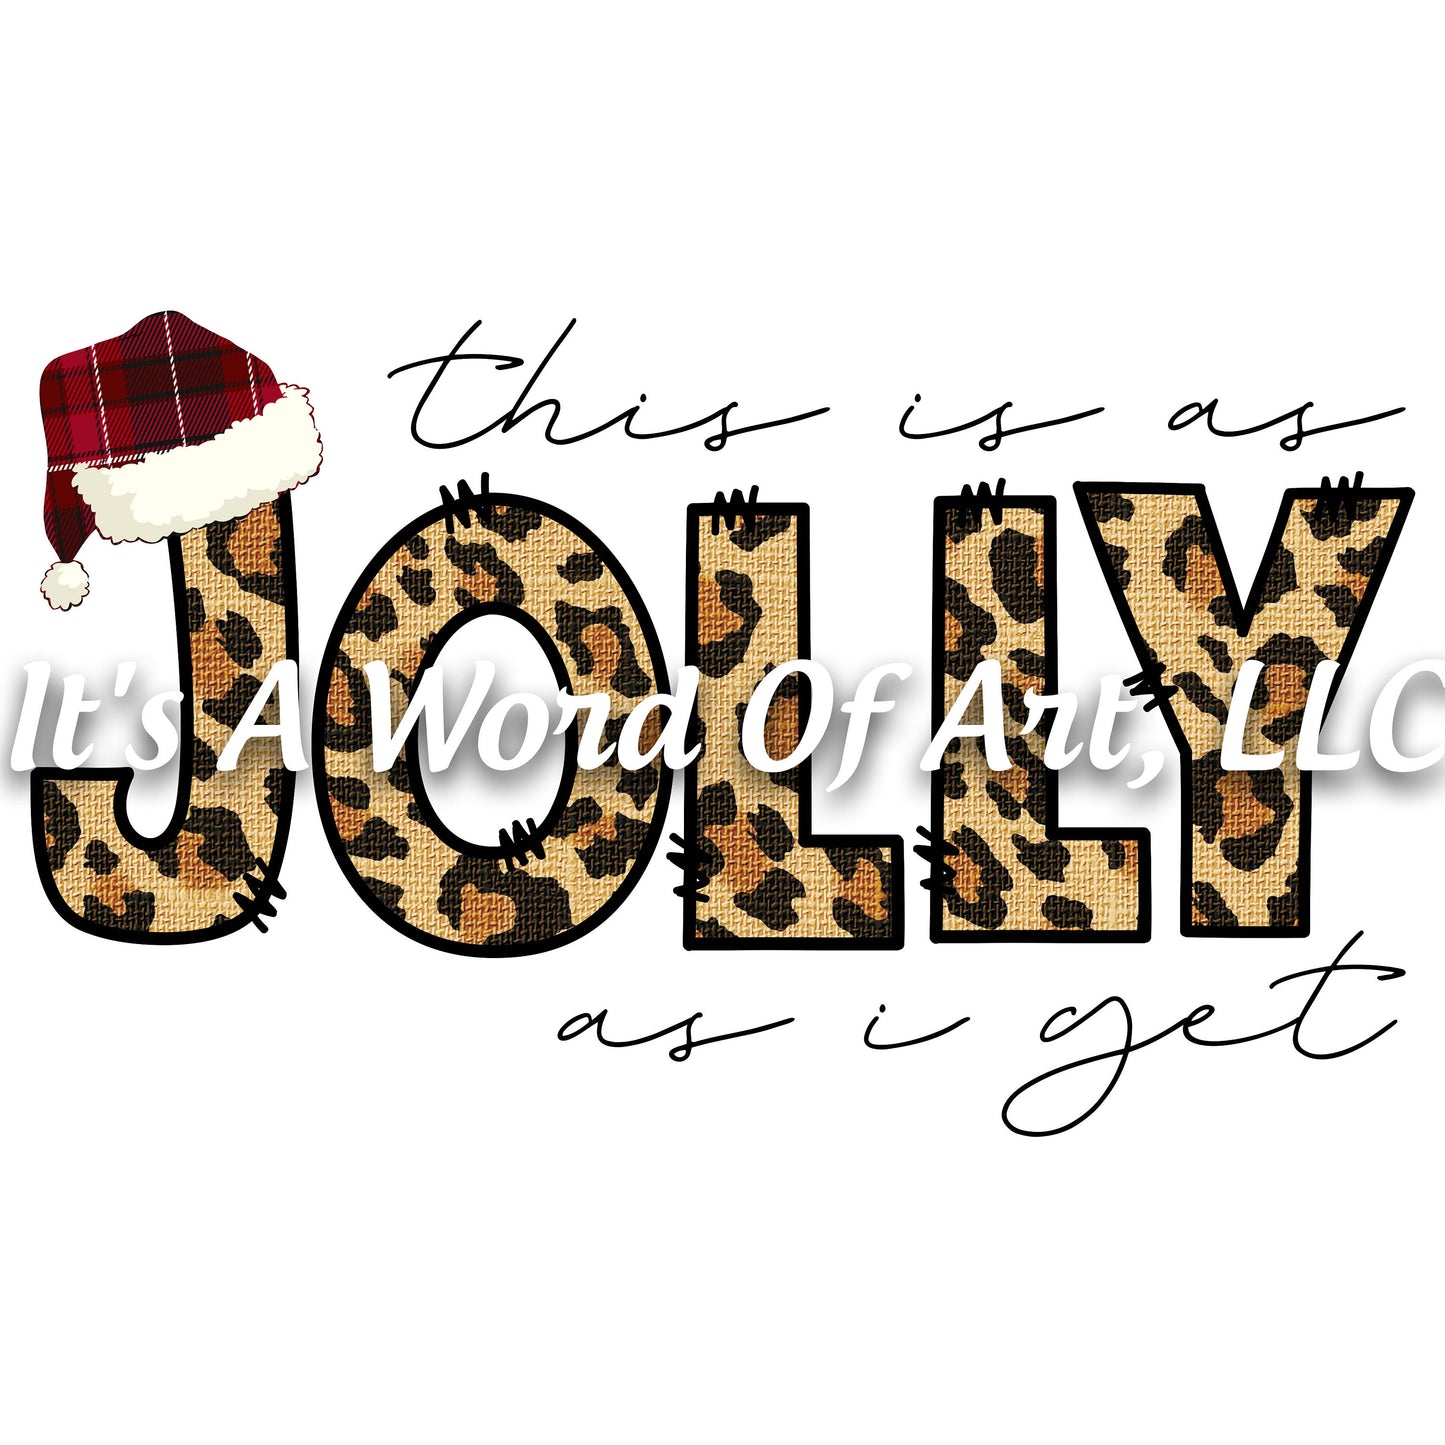 Christmas 209 - This is as Jolly as I get Leopard - Sublimation Transfer Set/Ready To Press Sublimation Transfer/Sublimation Transfer